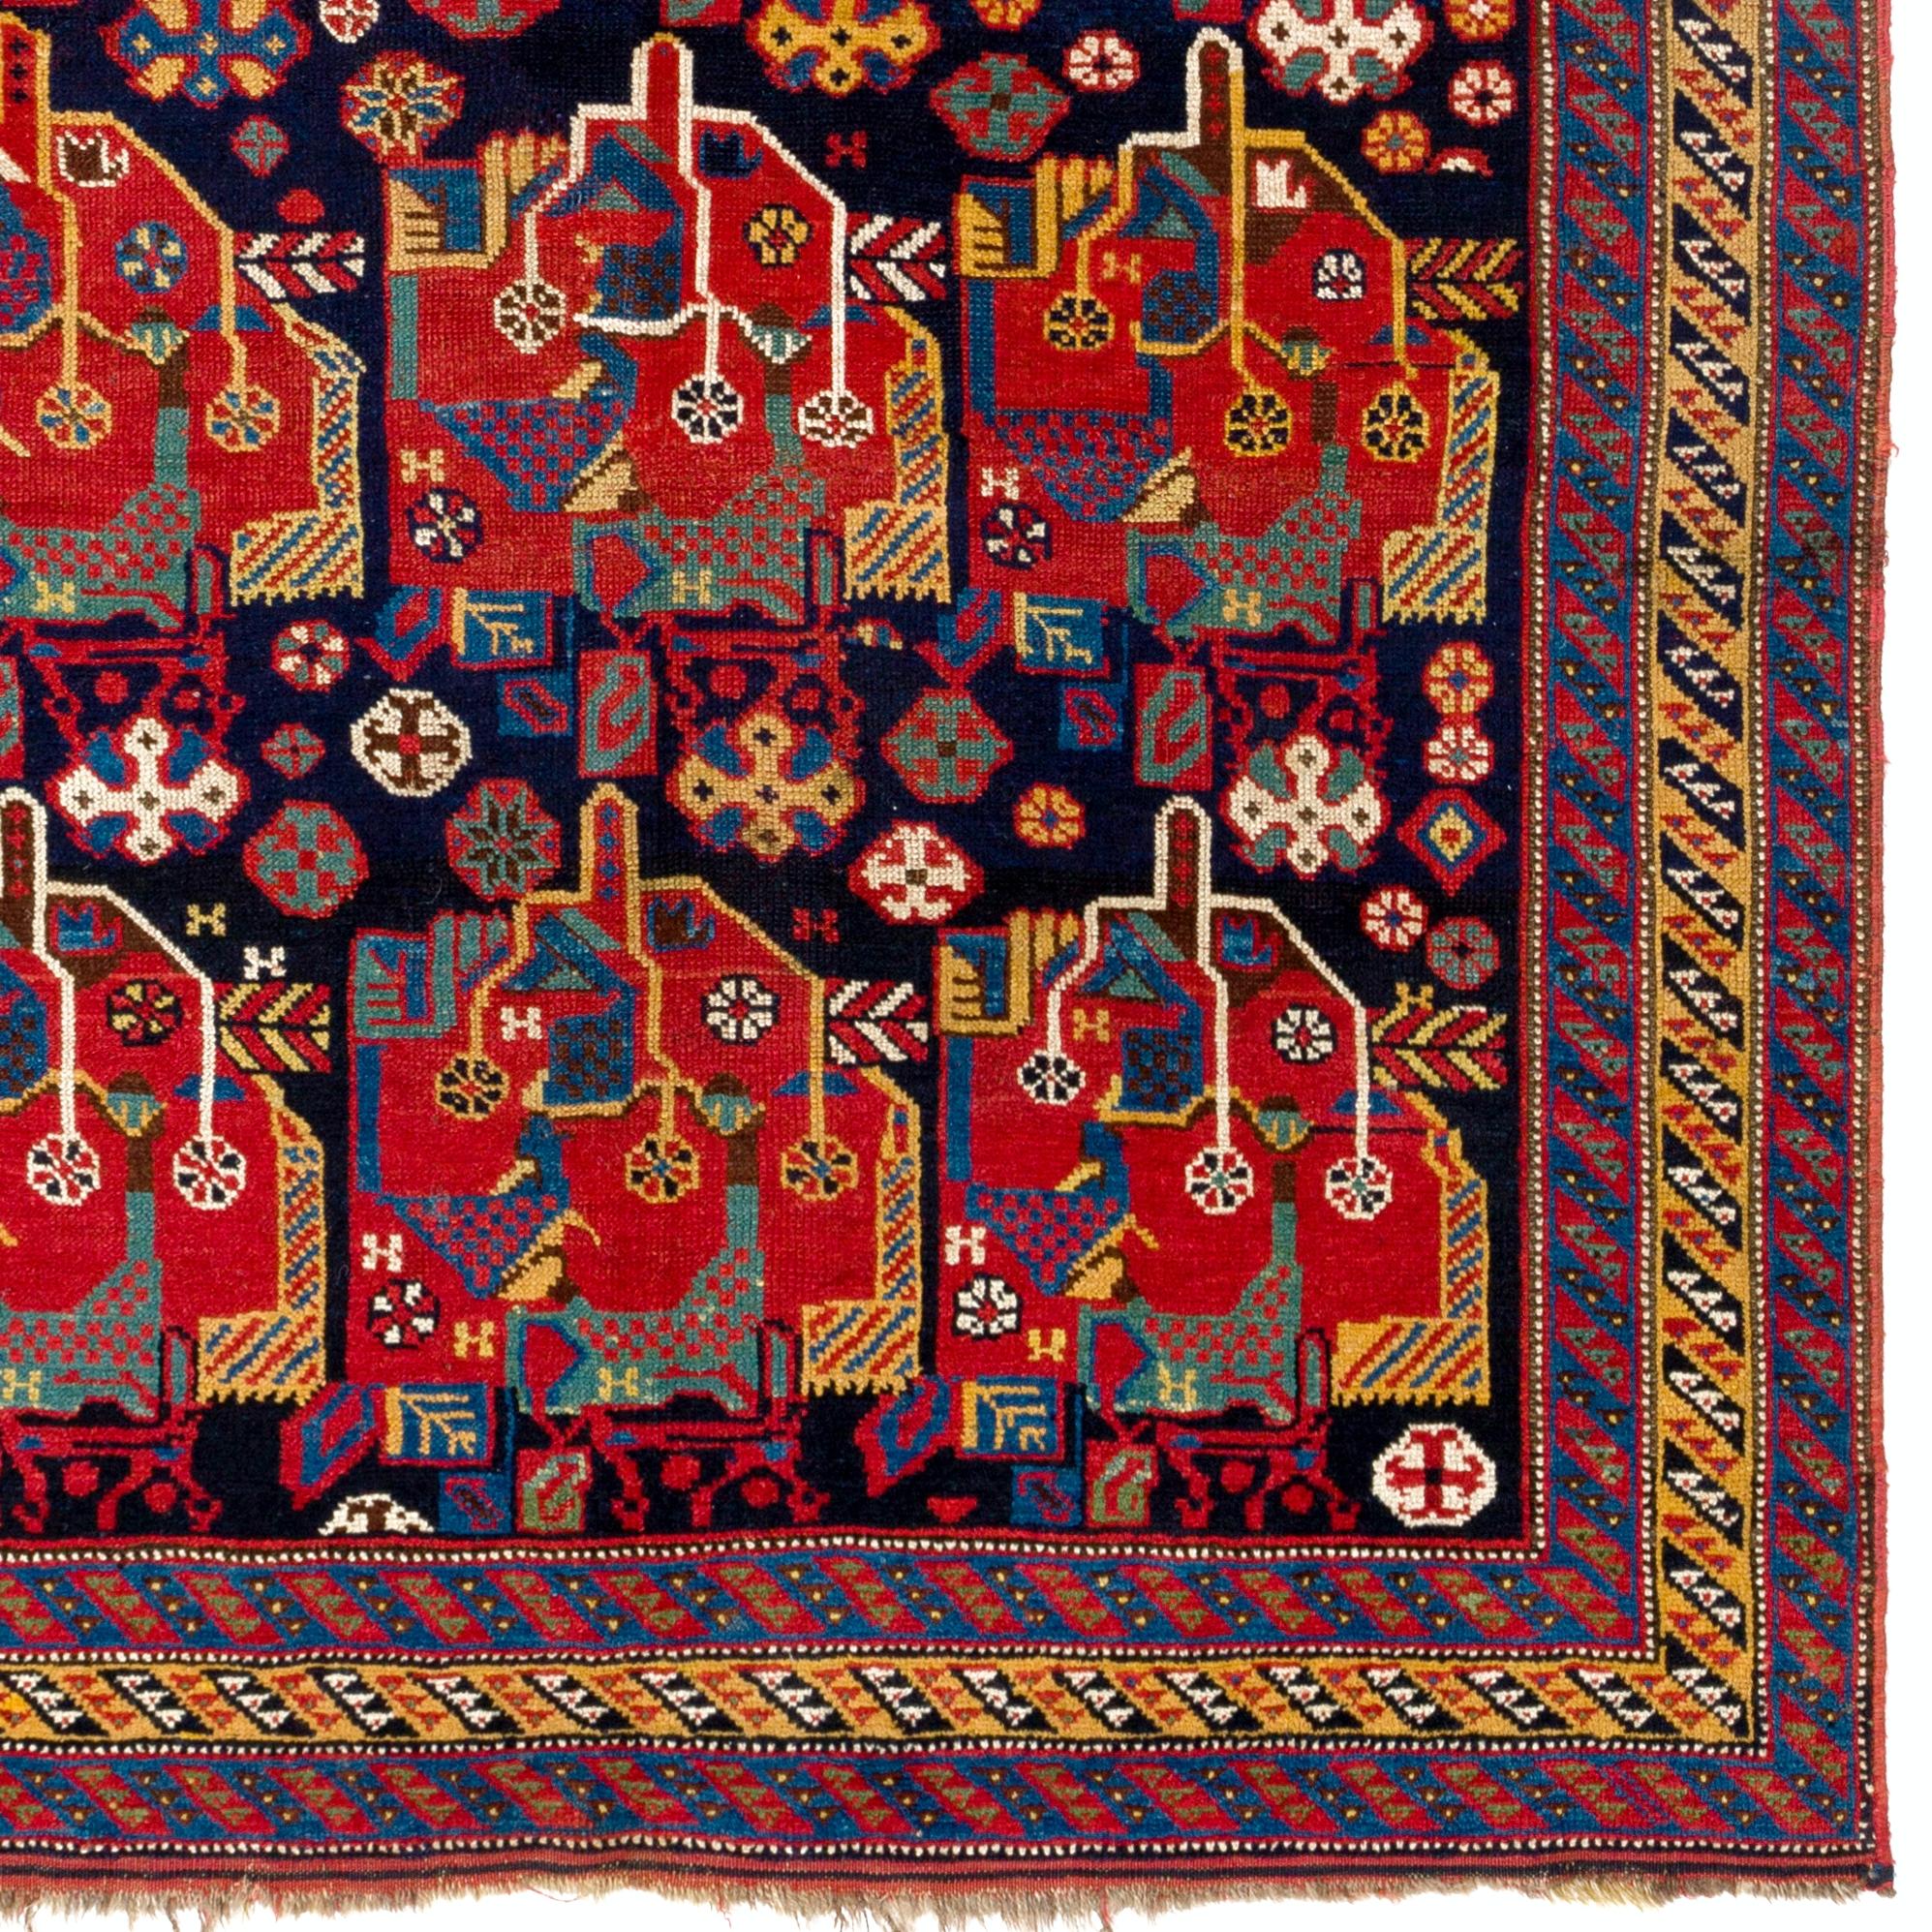 19th Century 4.4x8 Ft Antique Persian Qashqai Rug. One of a Kind Tribal Oriental Carpet For Sale